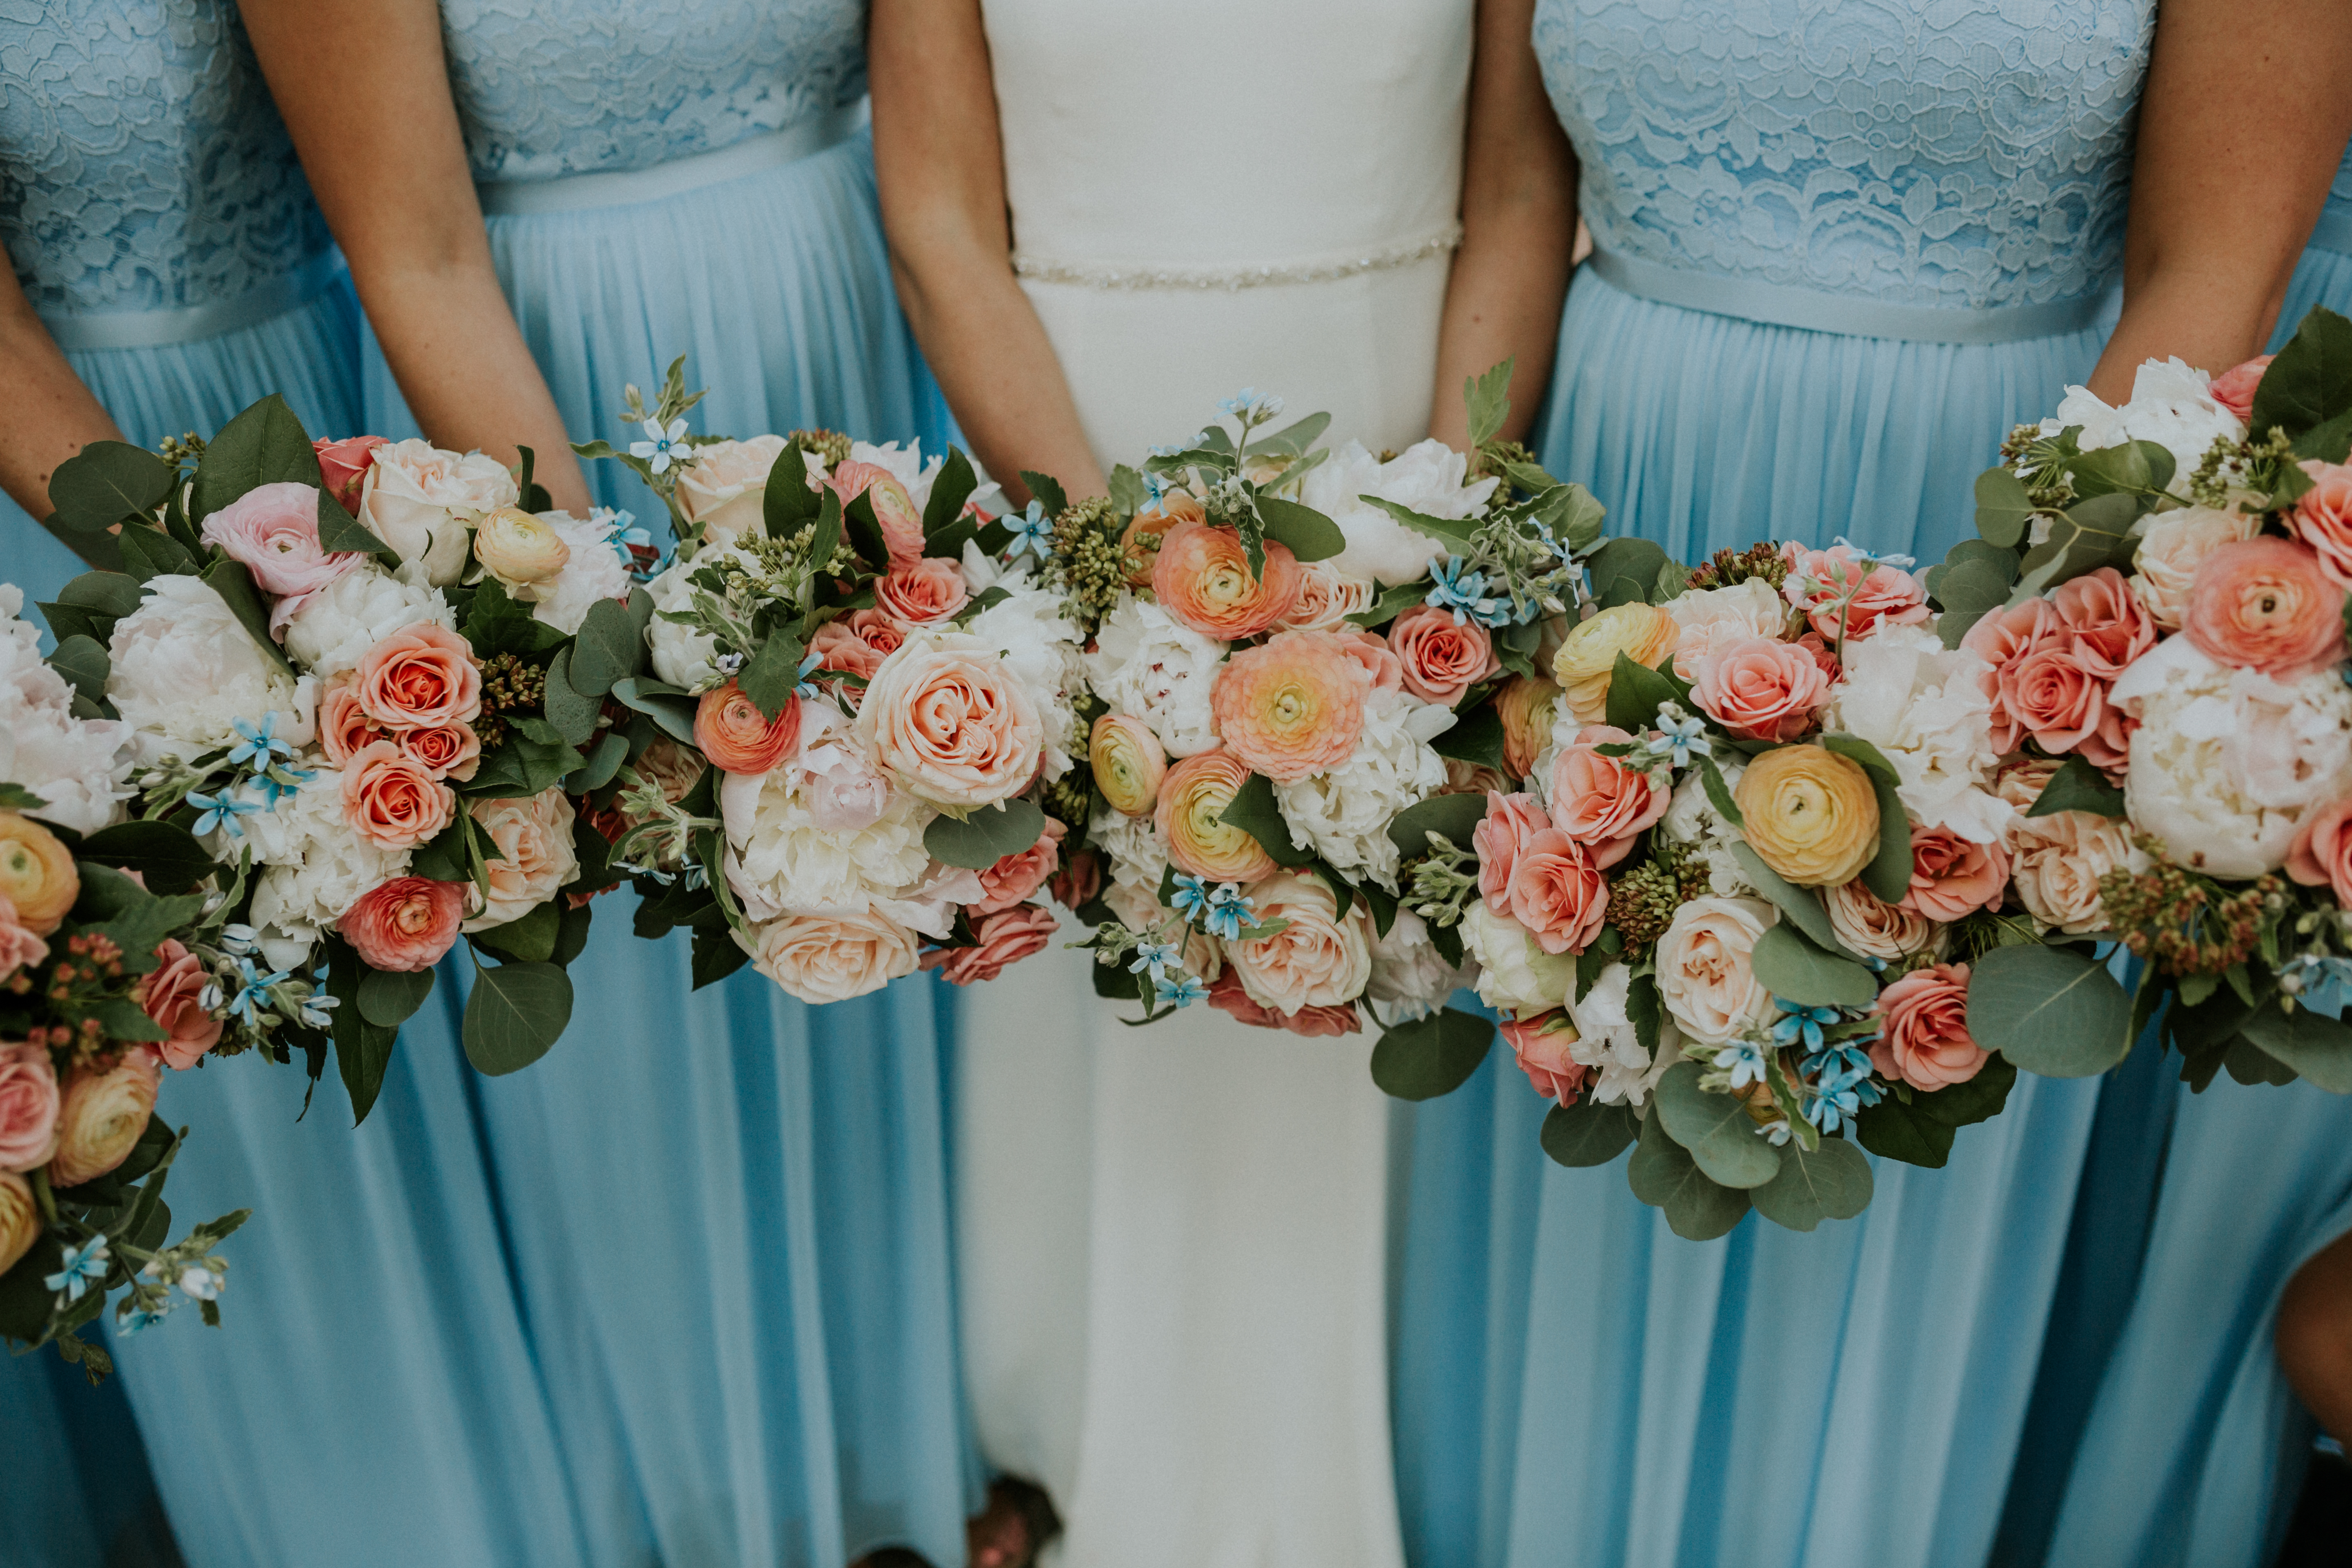 Bridal party in sky blue dresses with gardeny wedding bouquets of roses, peonies, and ranunculus.